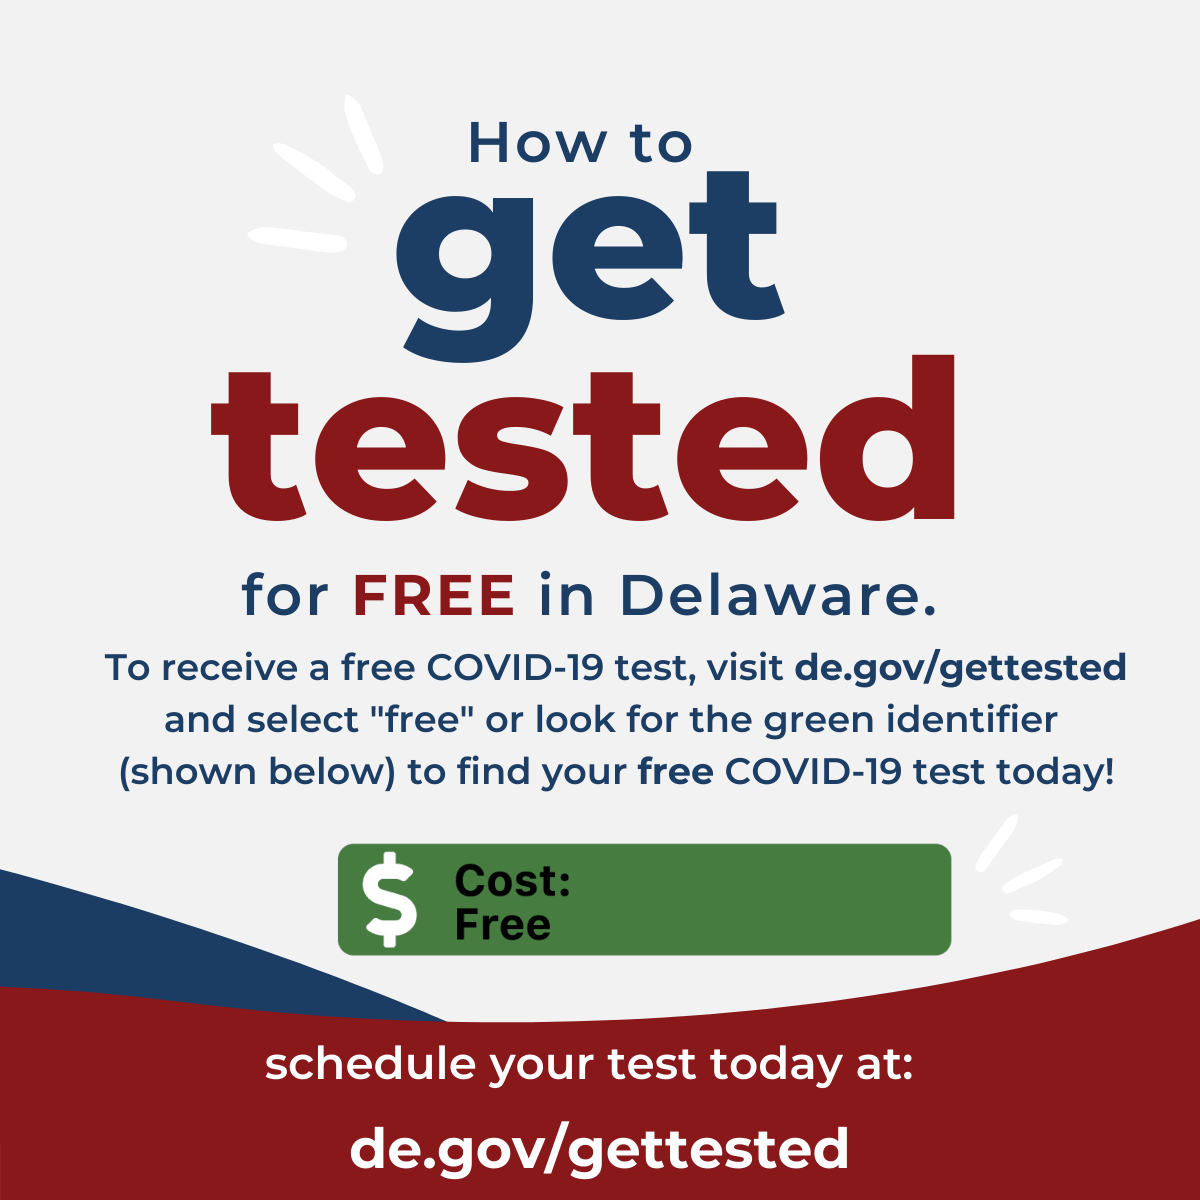 How to get tested for free in Delaware.